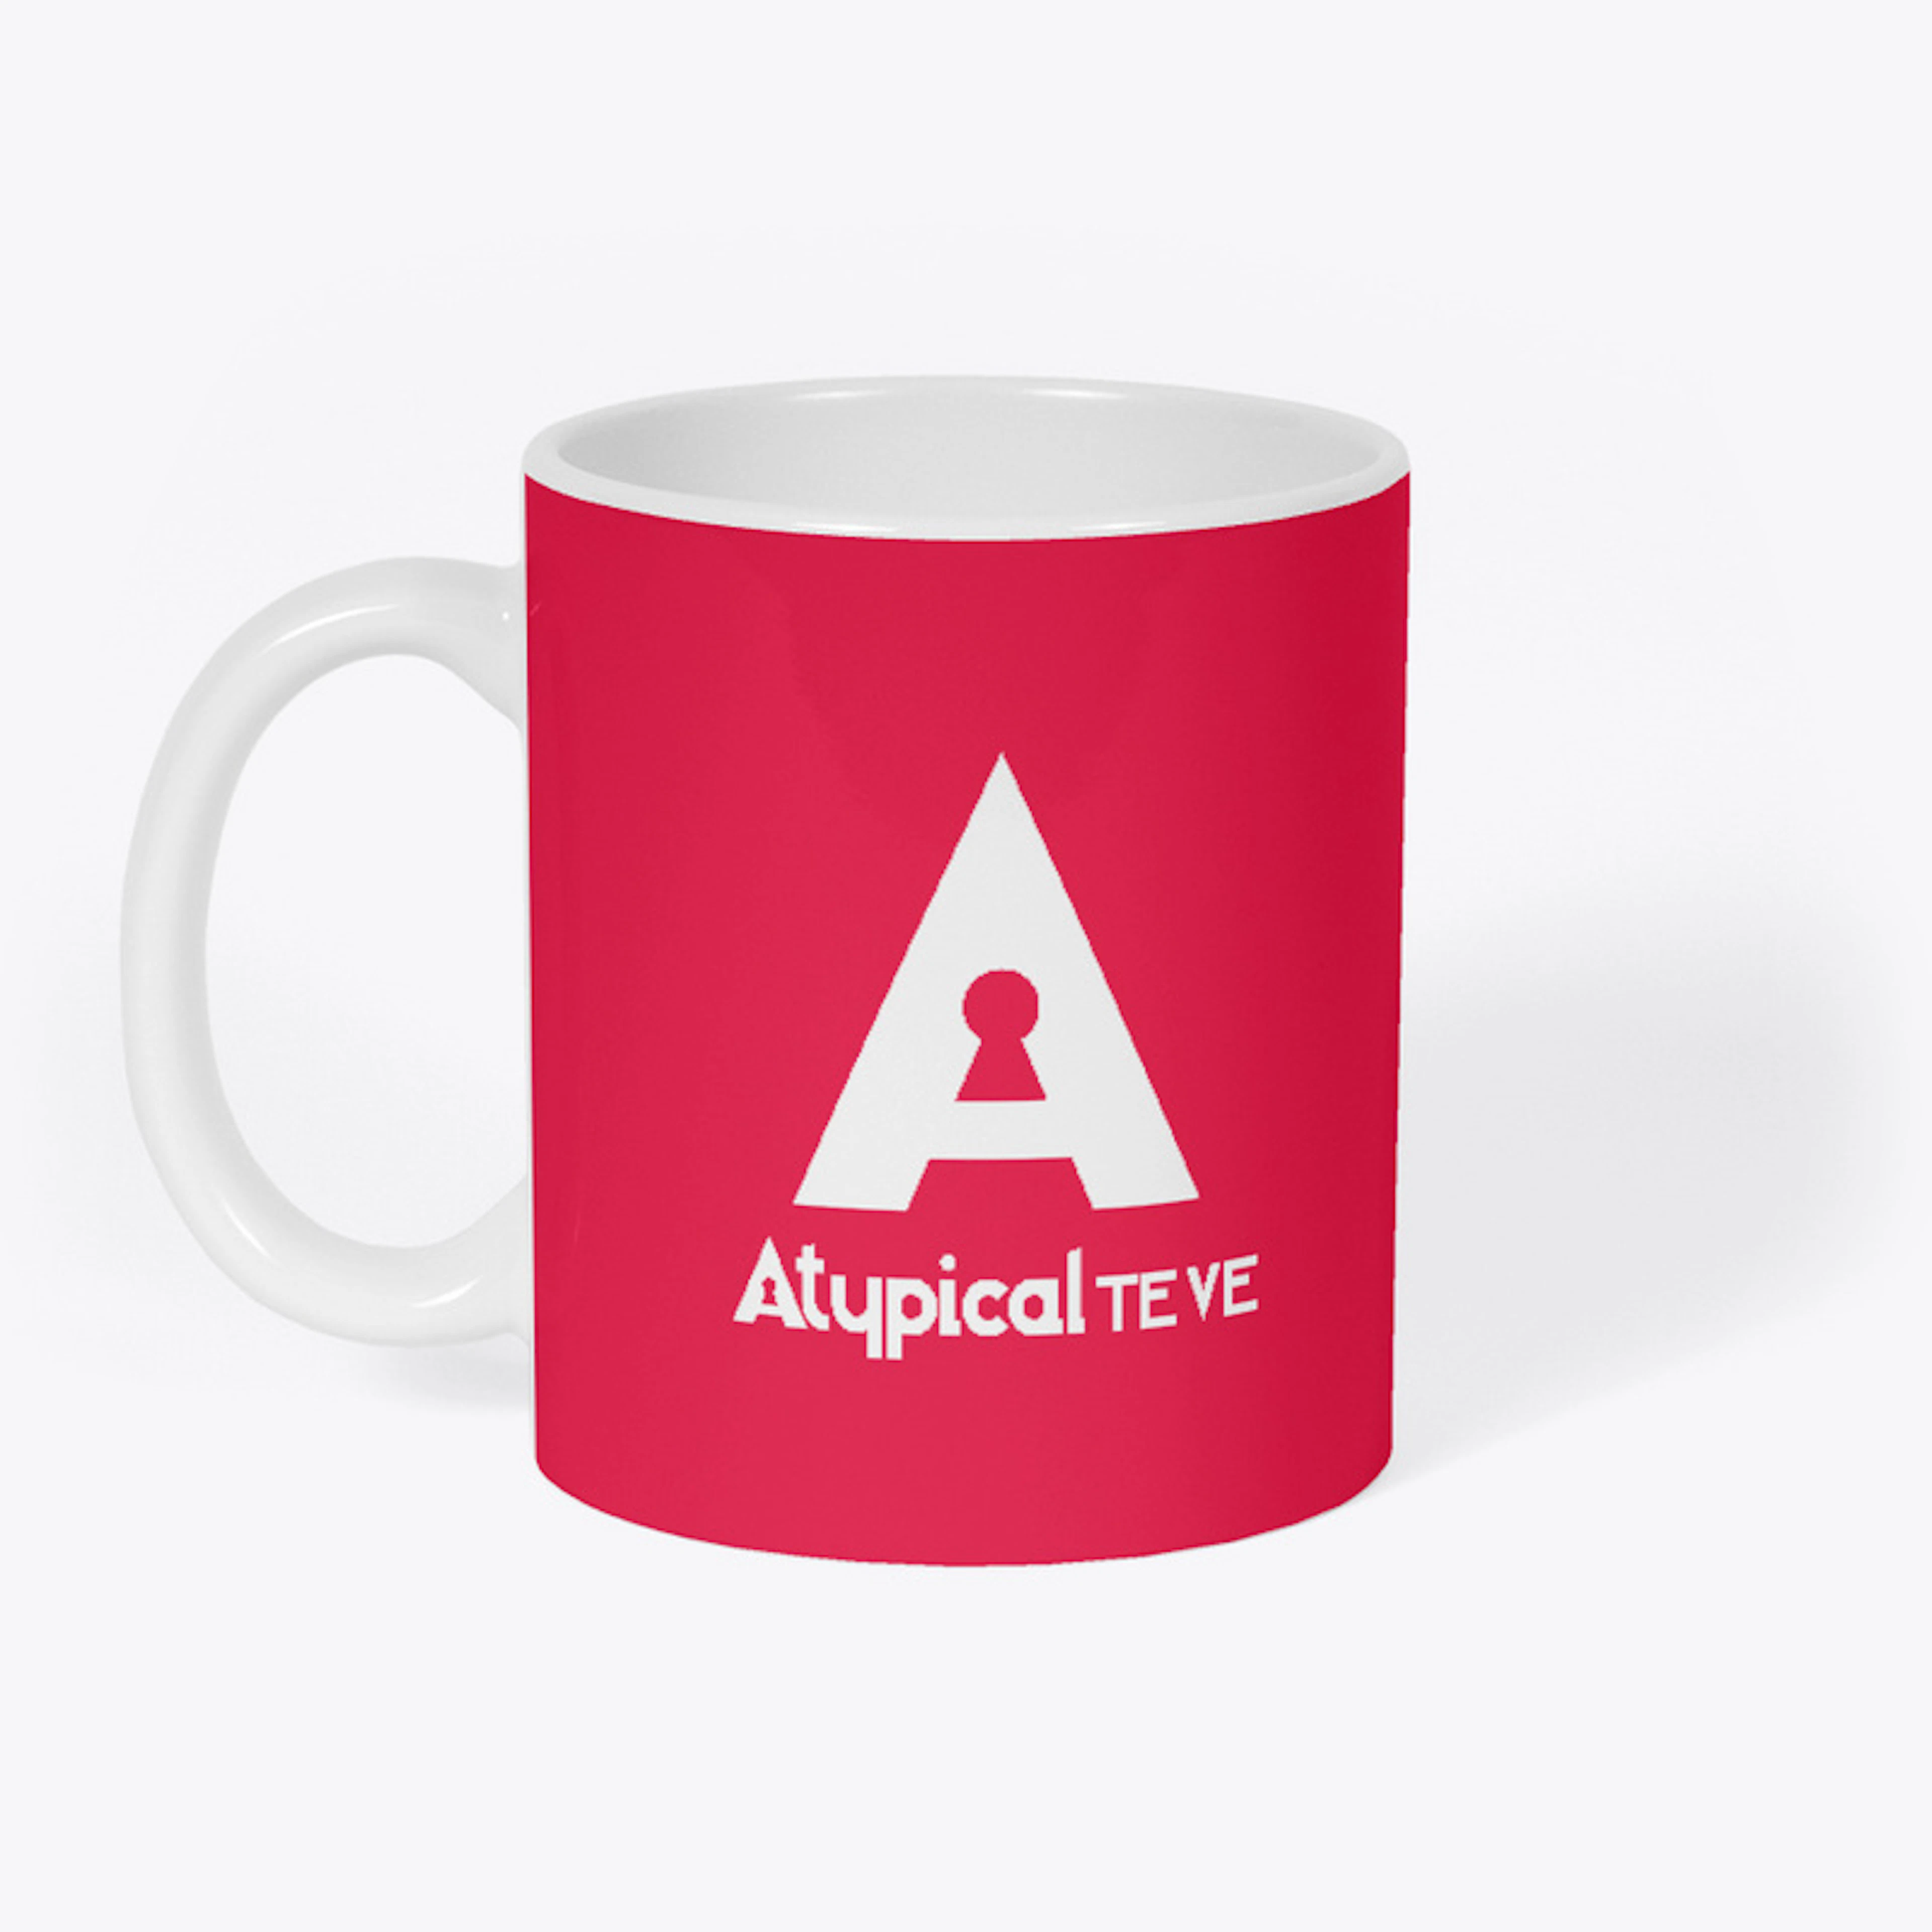 LOGO ATYPICAL TE VE